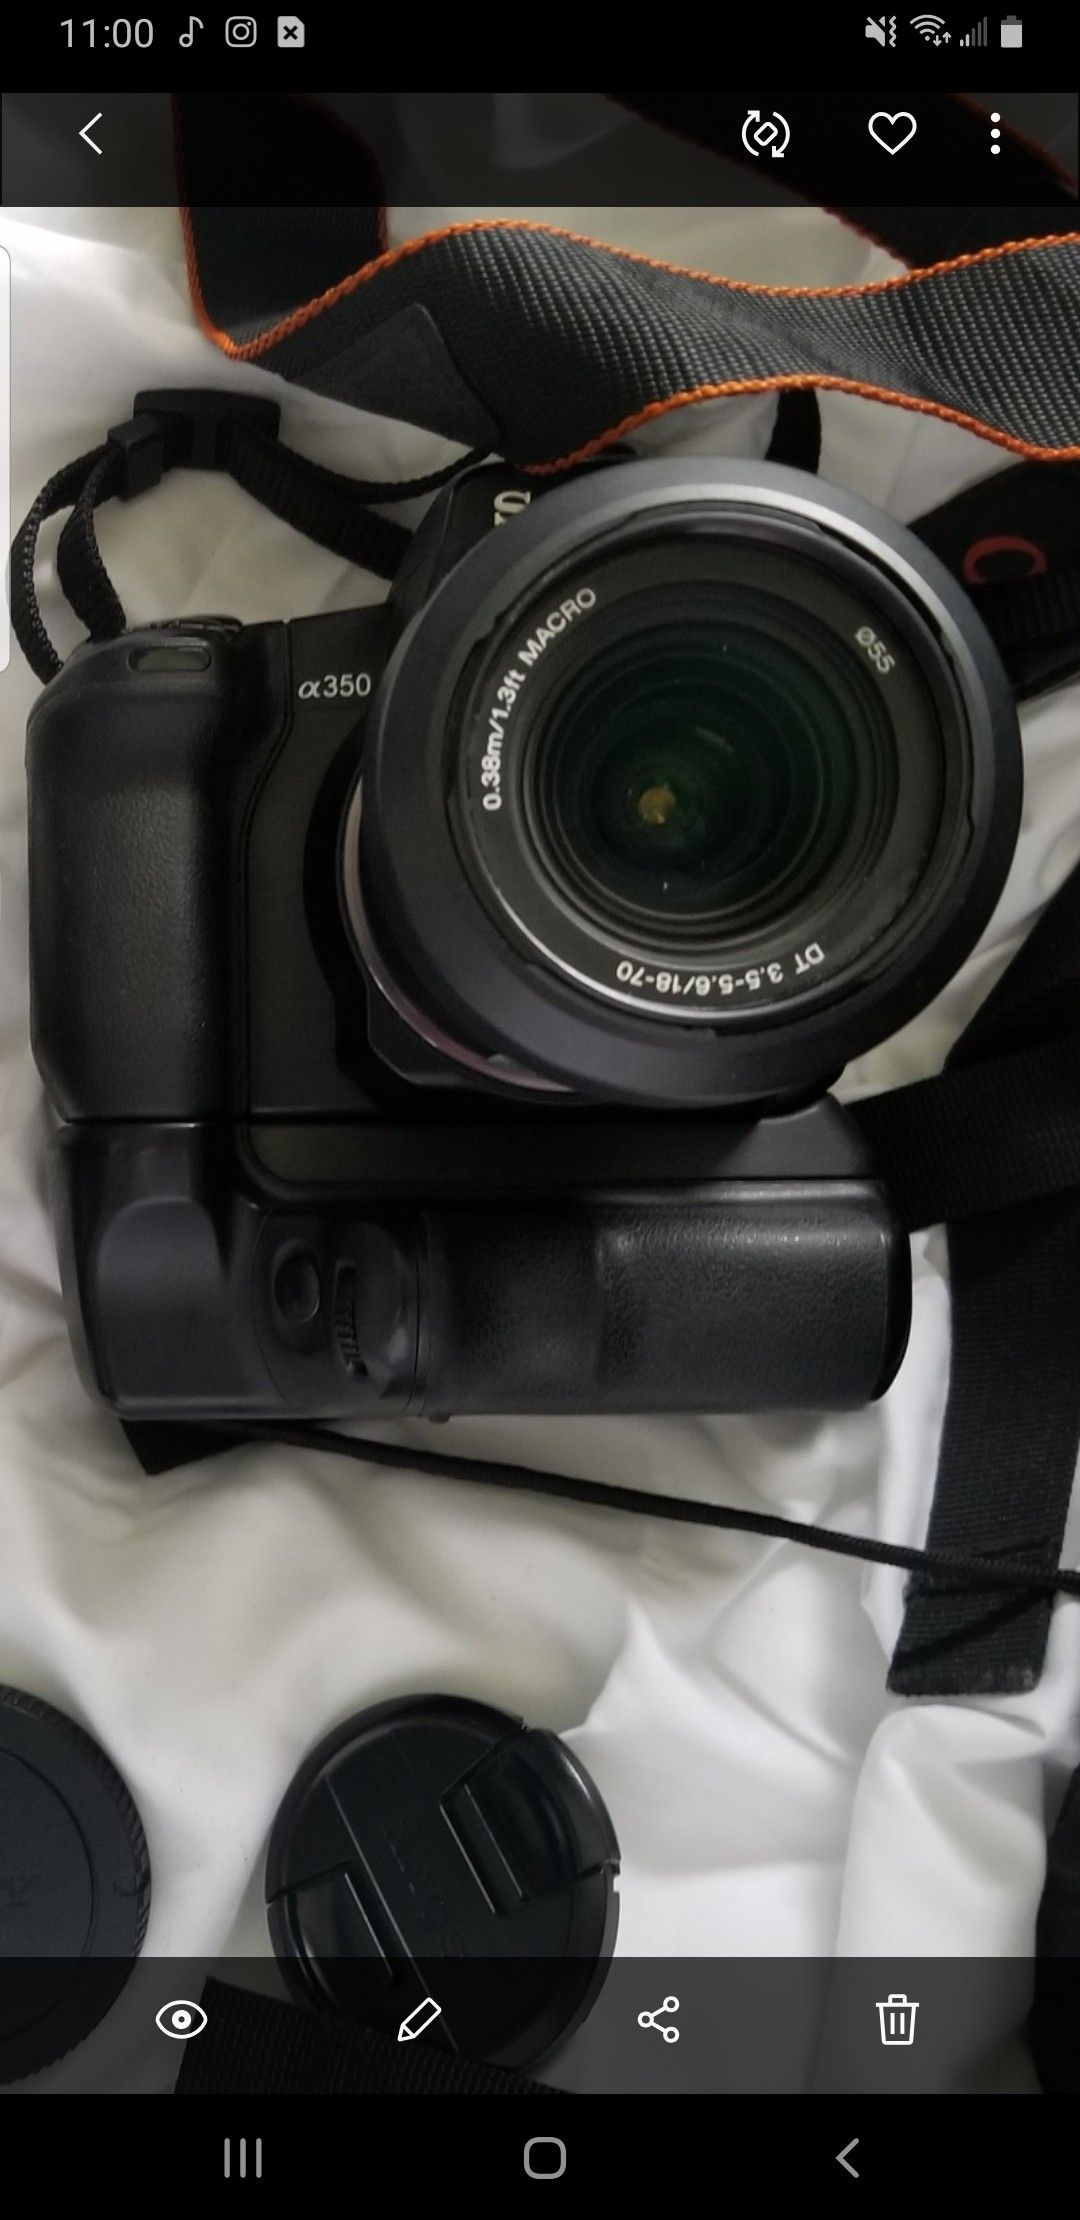 Professional Sony Alpha camera with extended battery grip